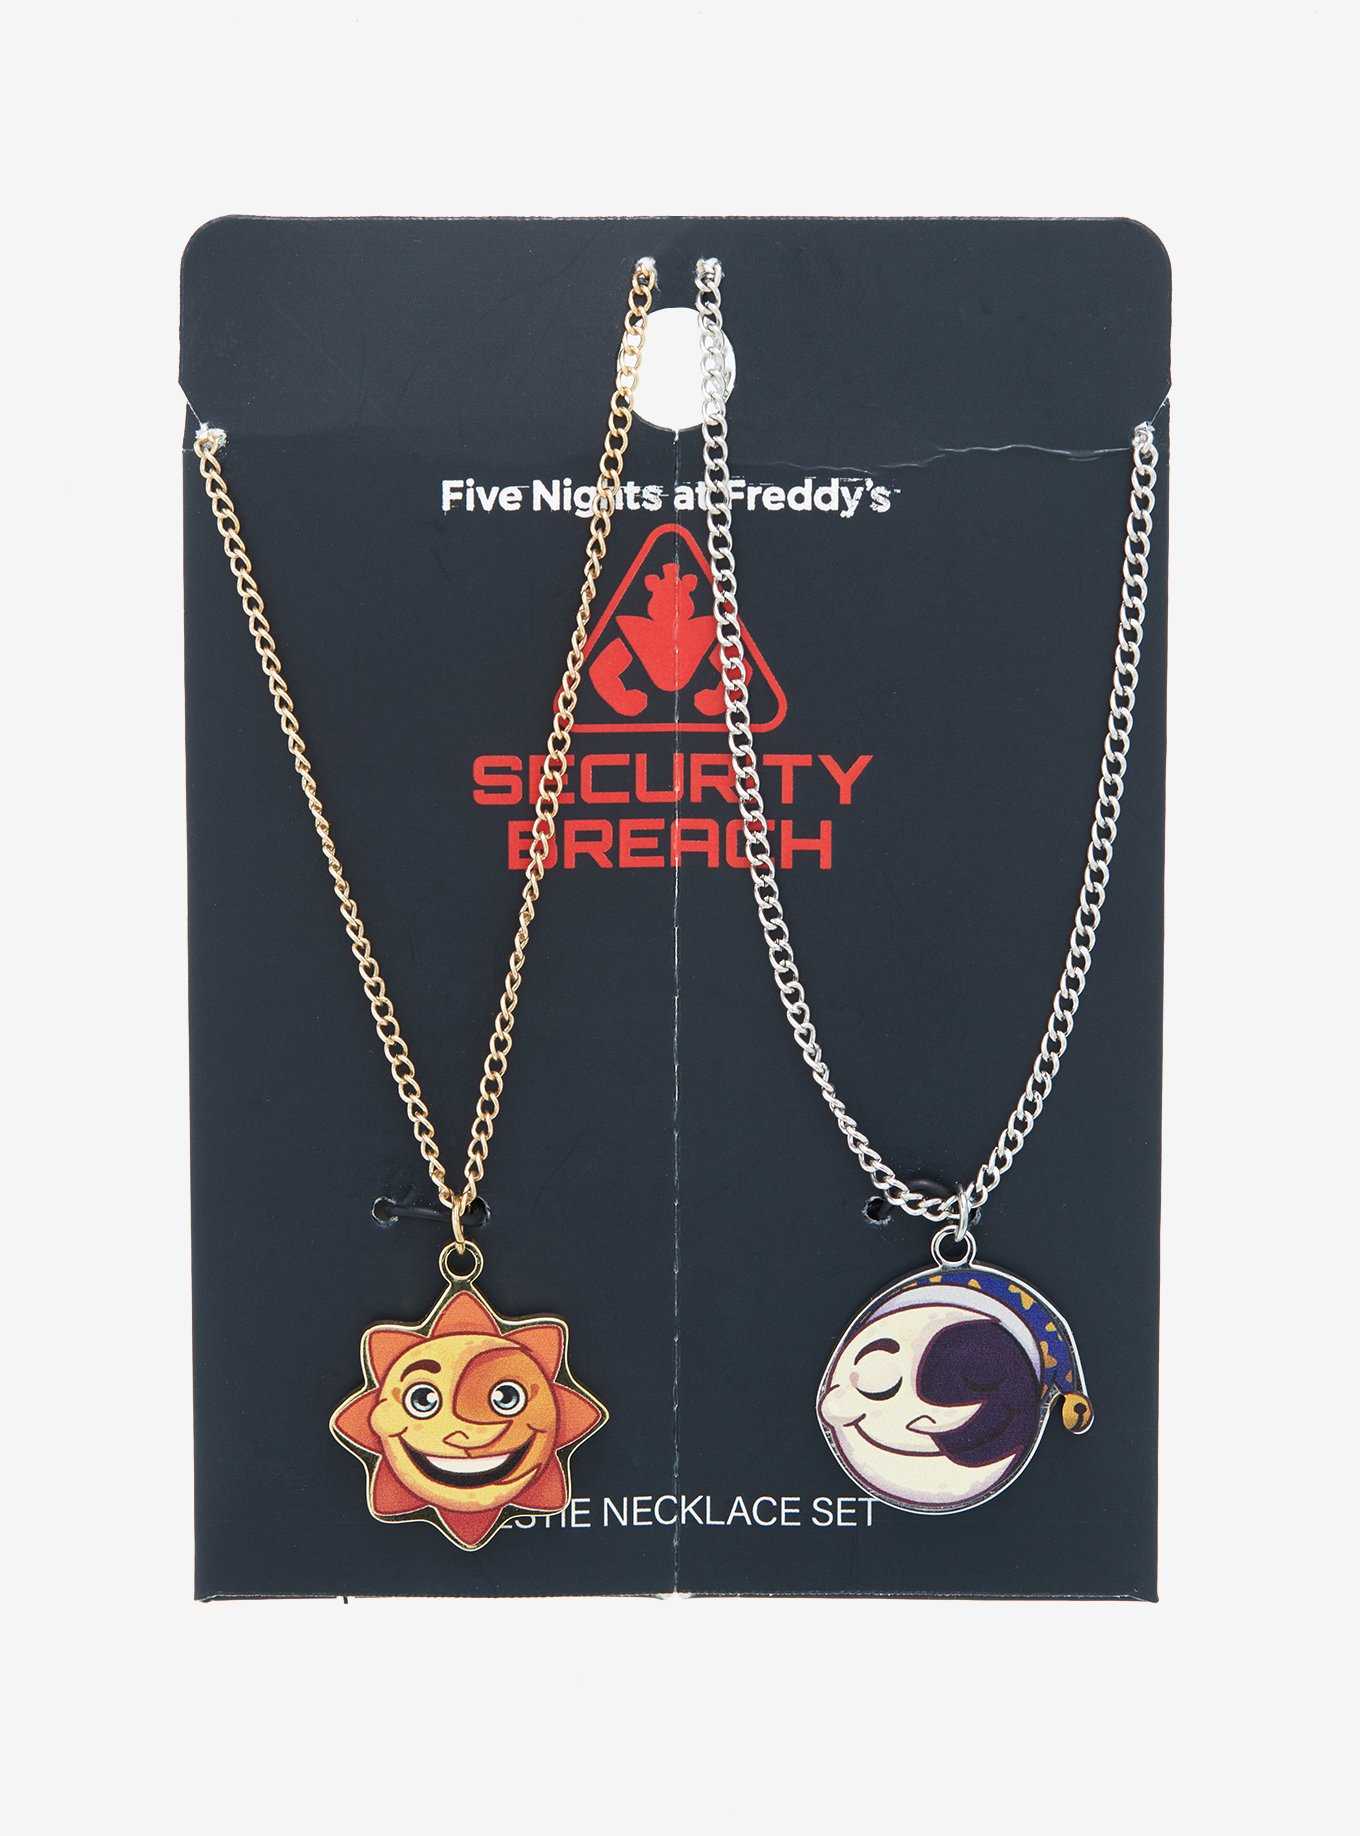 Five Nights at Freddy's Security Metal Pendant Necklace